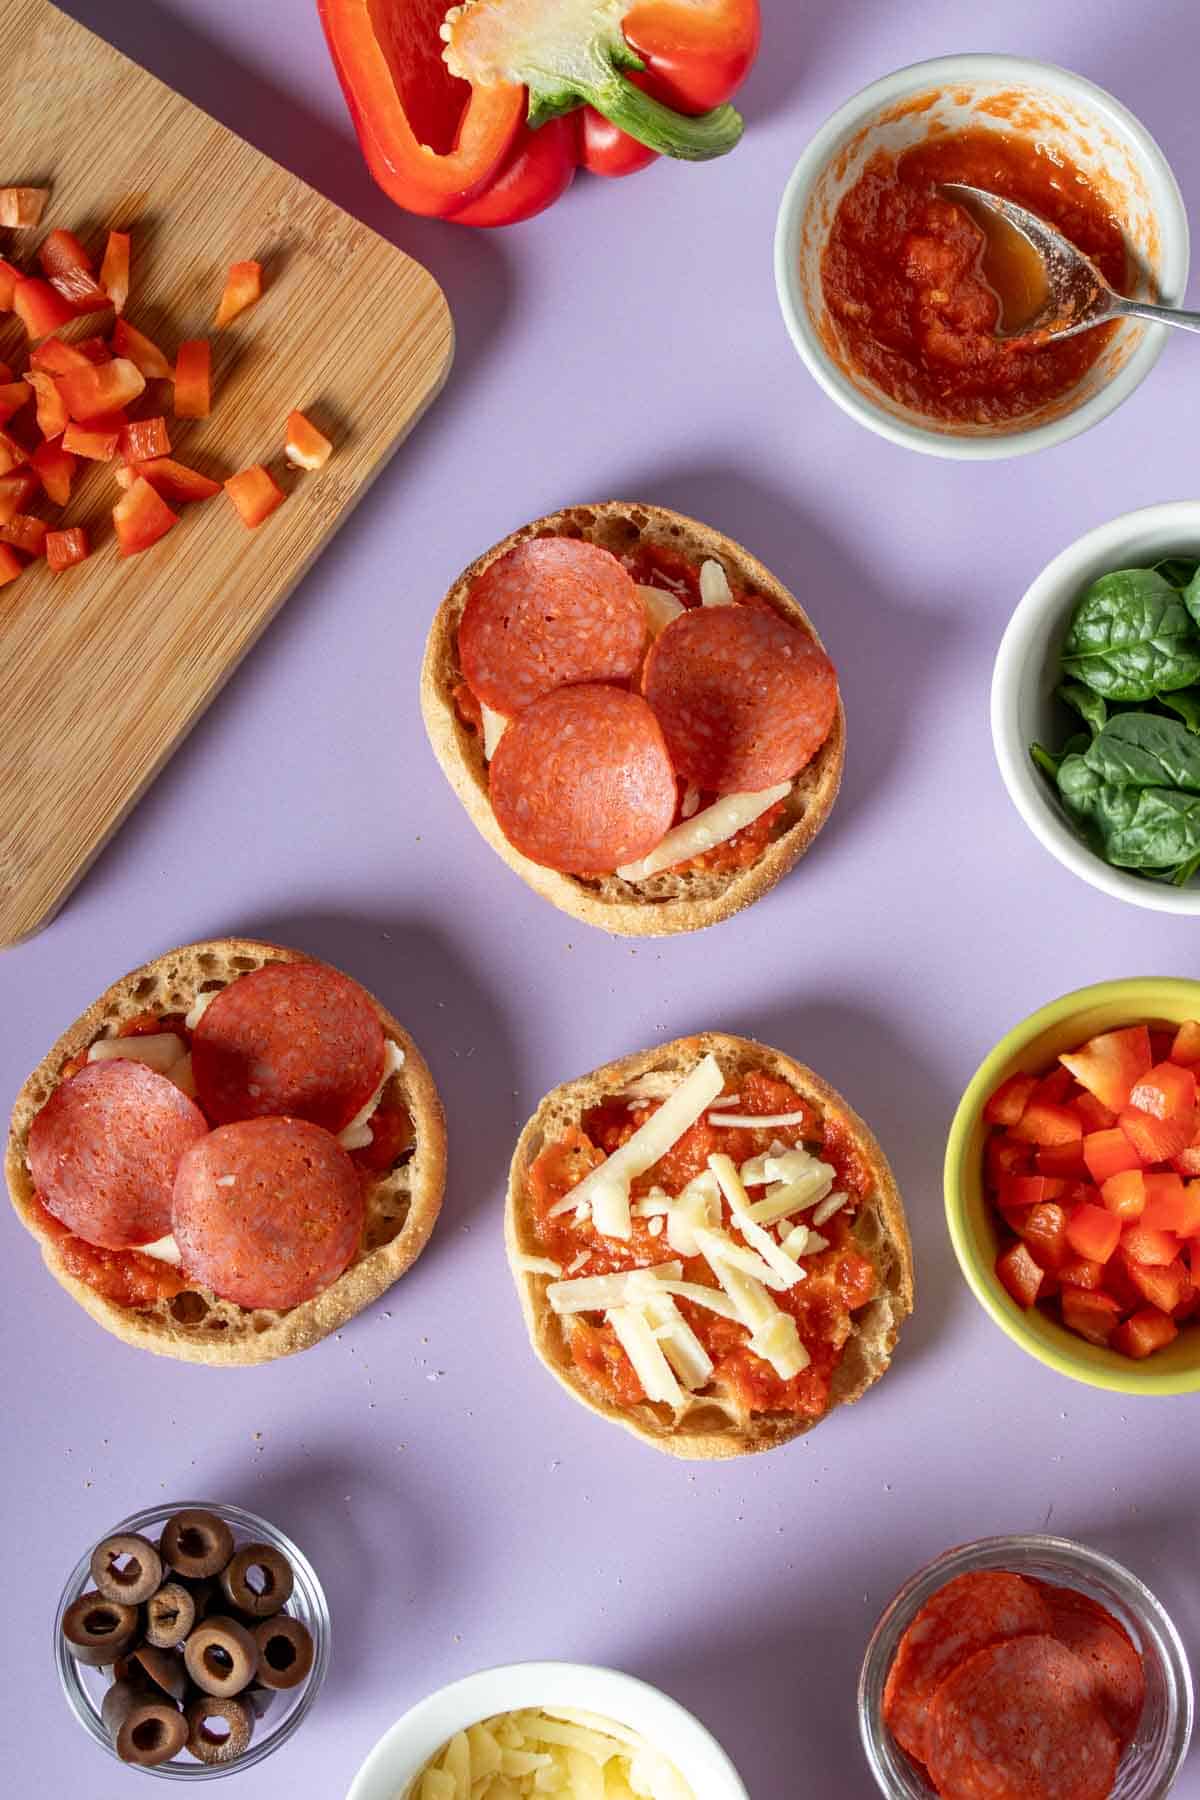 English muffin pizzas being topped with pepperoni and cheese and other ingredients around them on a purple surface.